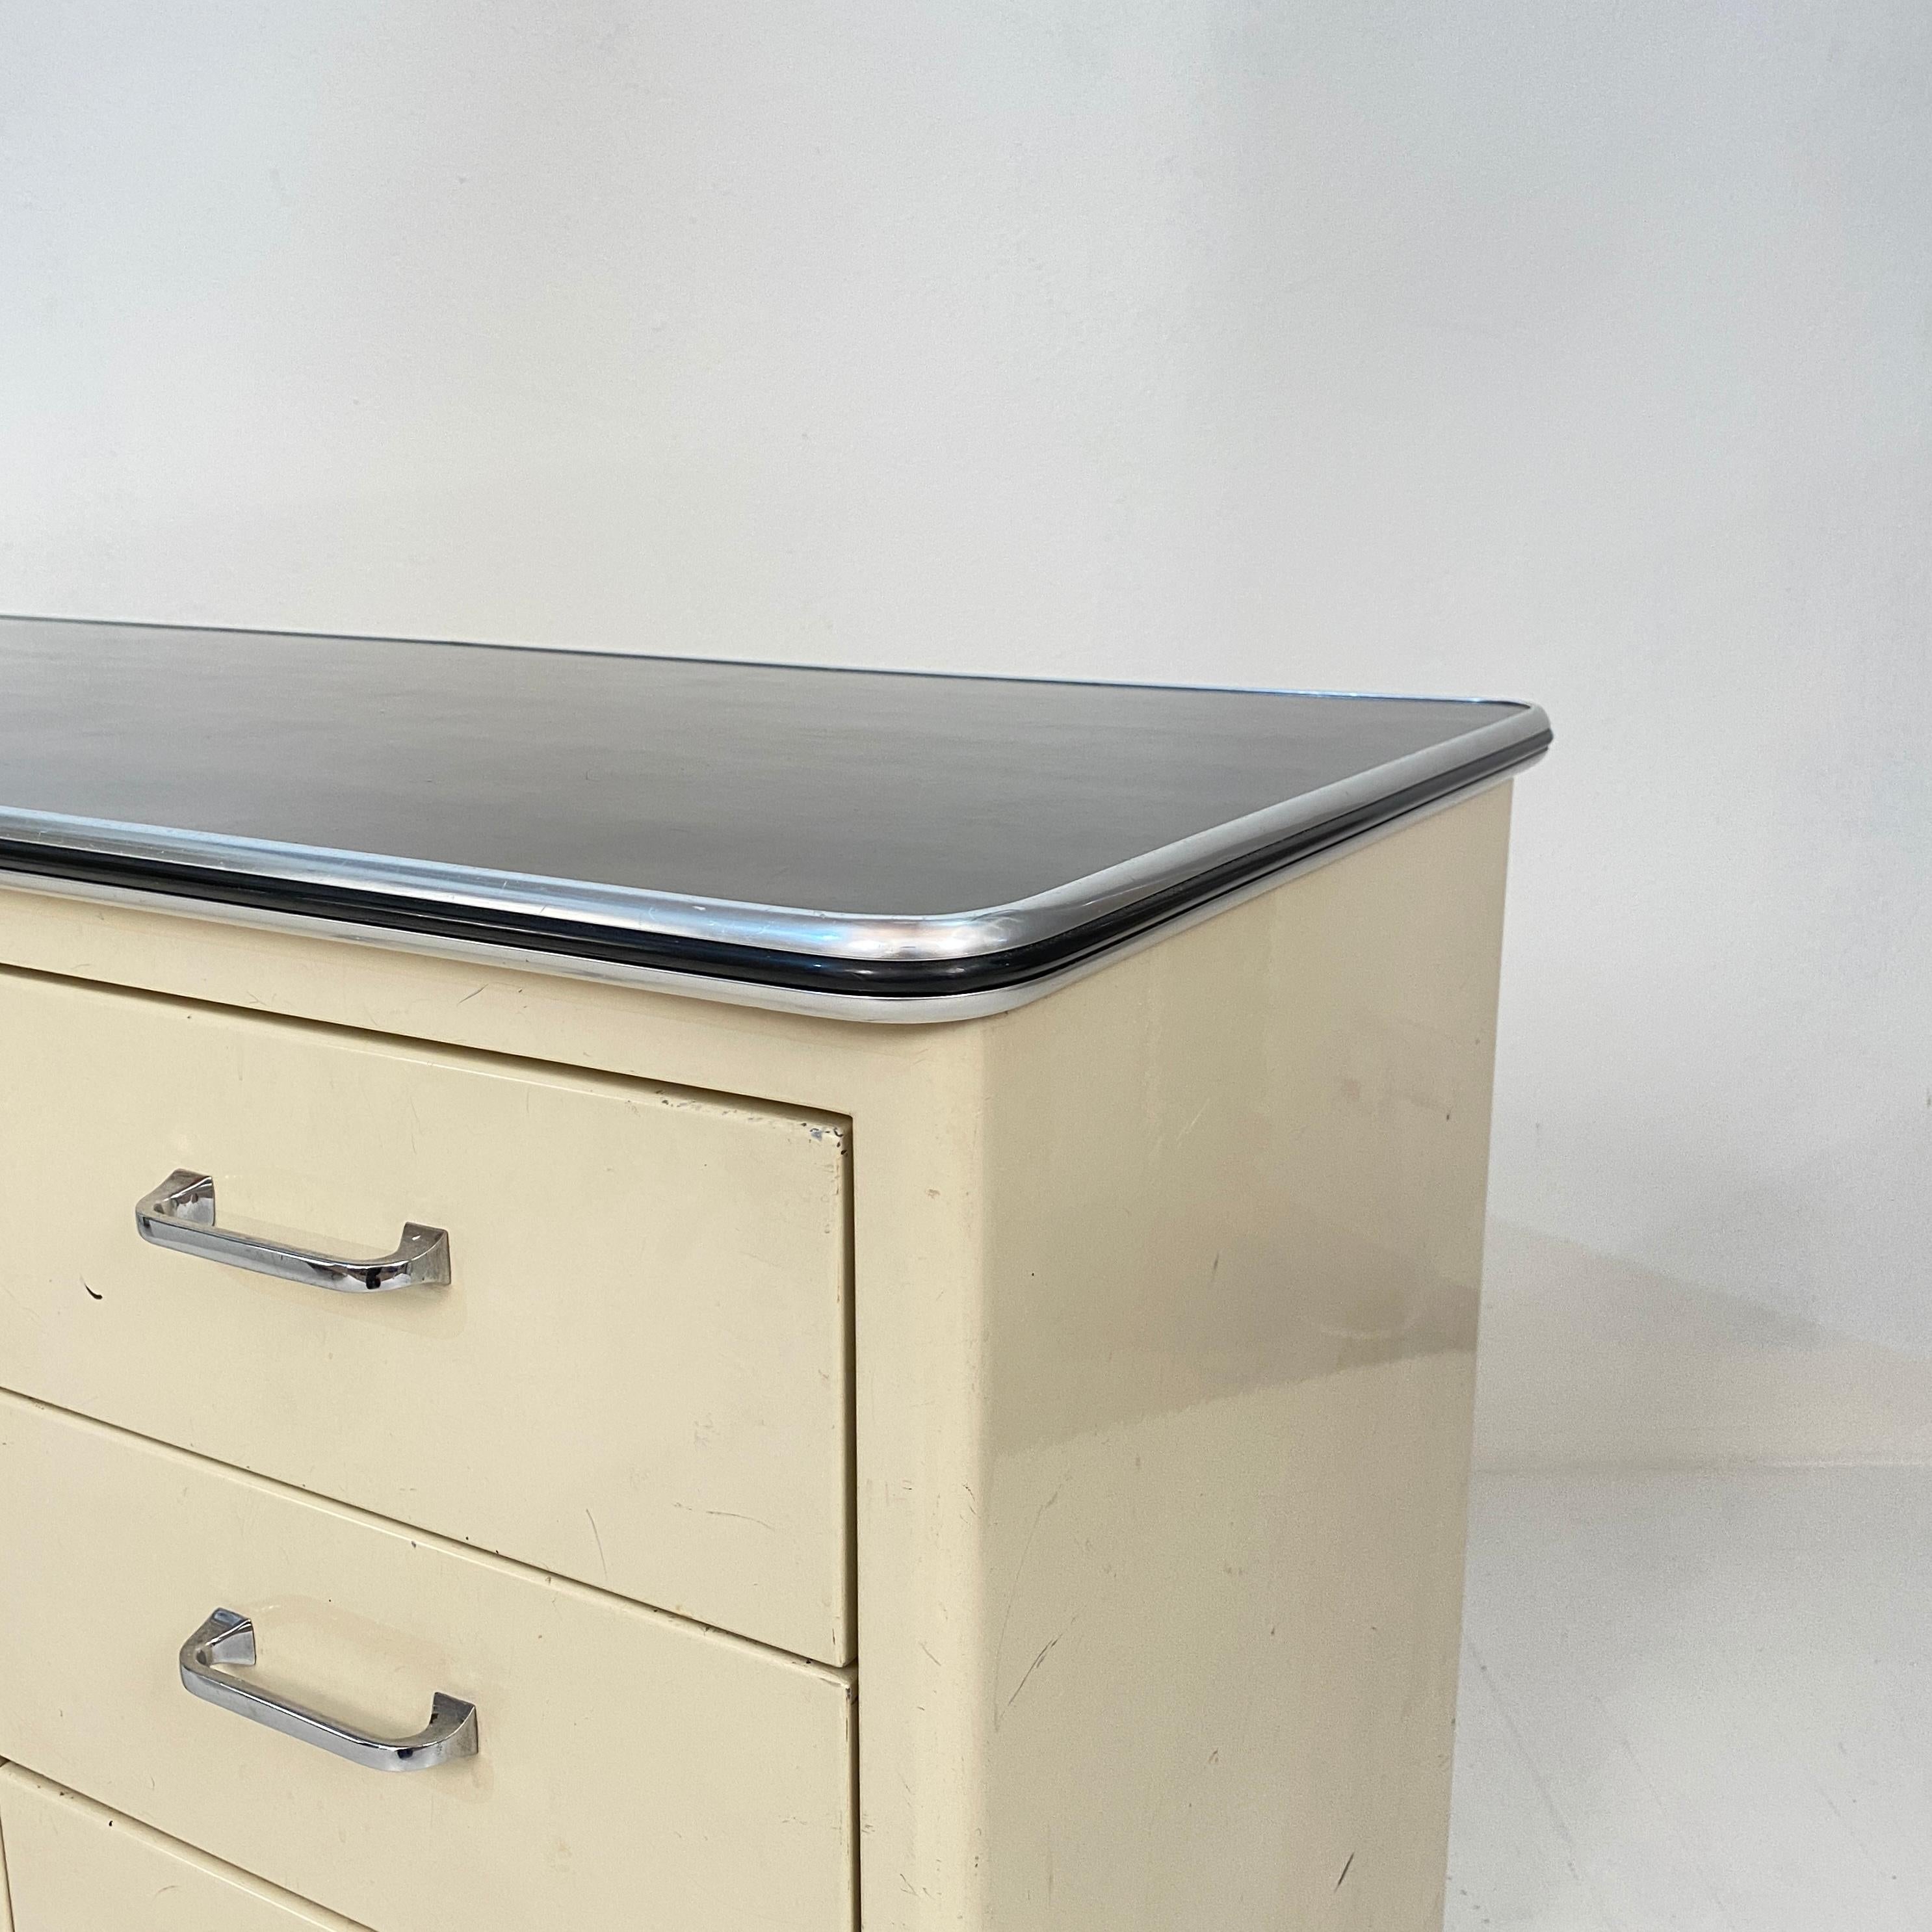 Chrome 1930s German Bauhaus Desk Out of White Lacquered Metal and a Black Linoleum Top